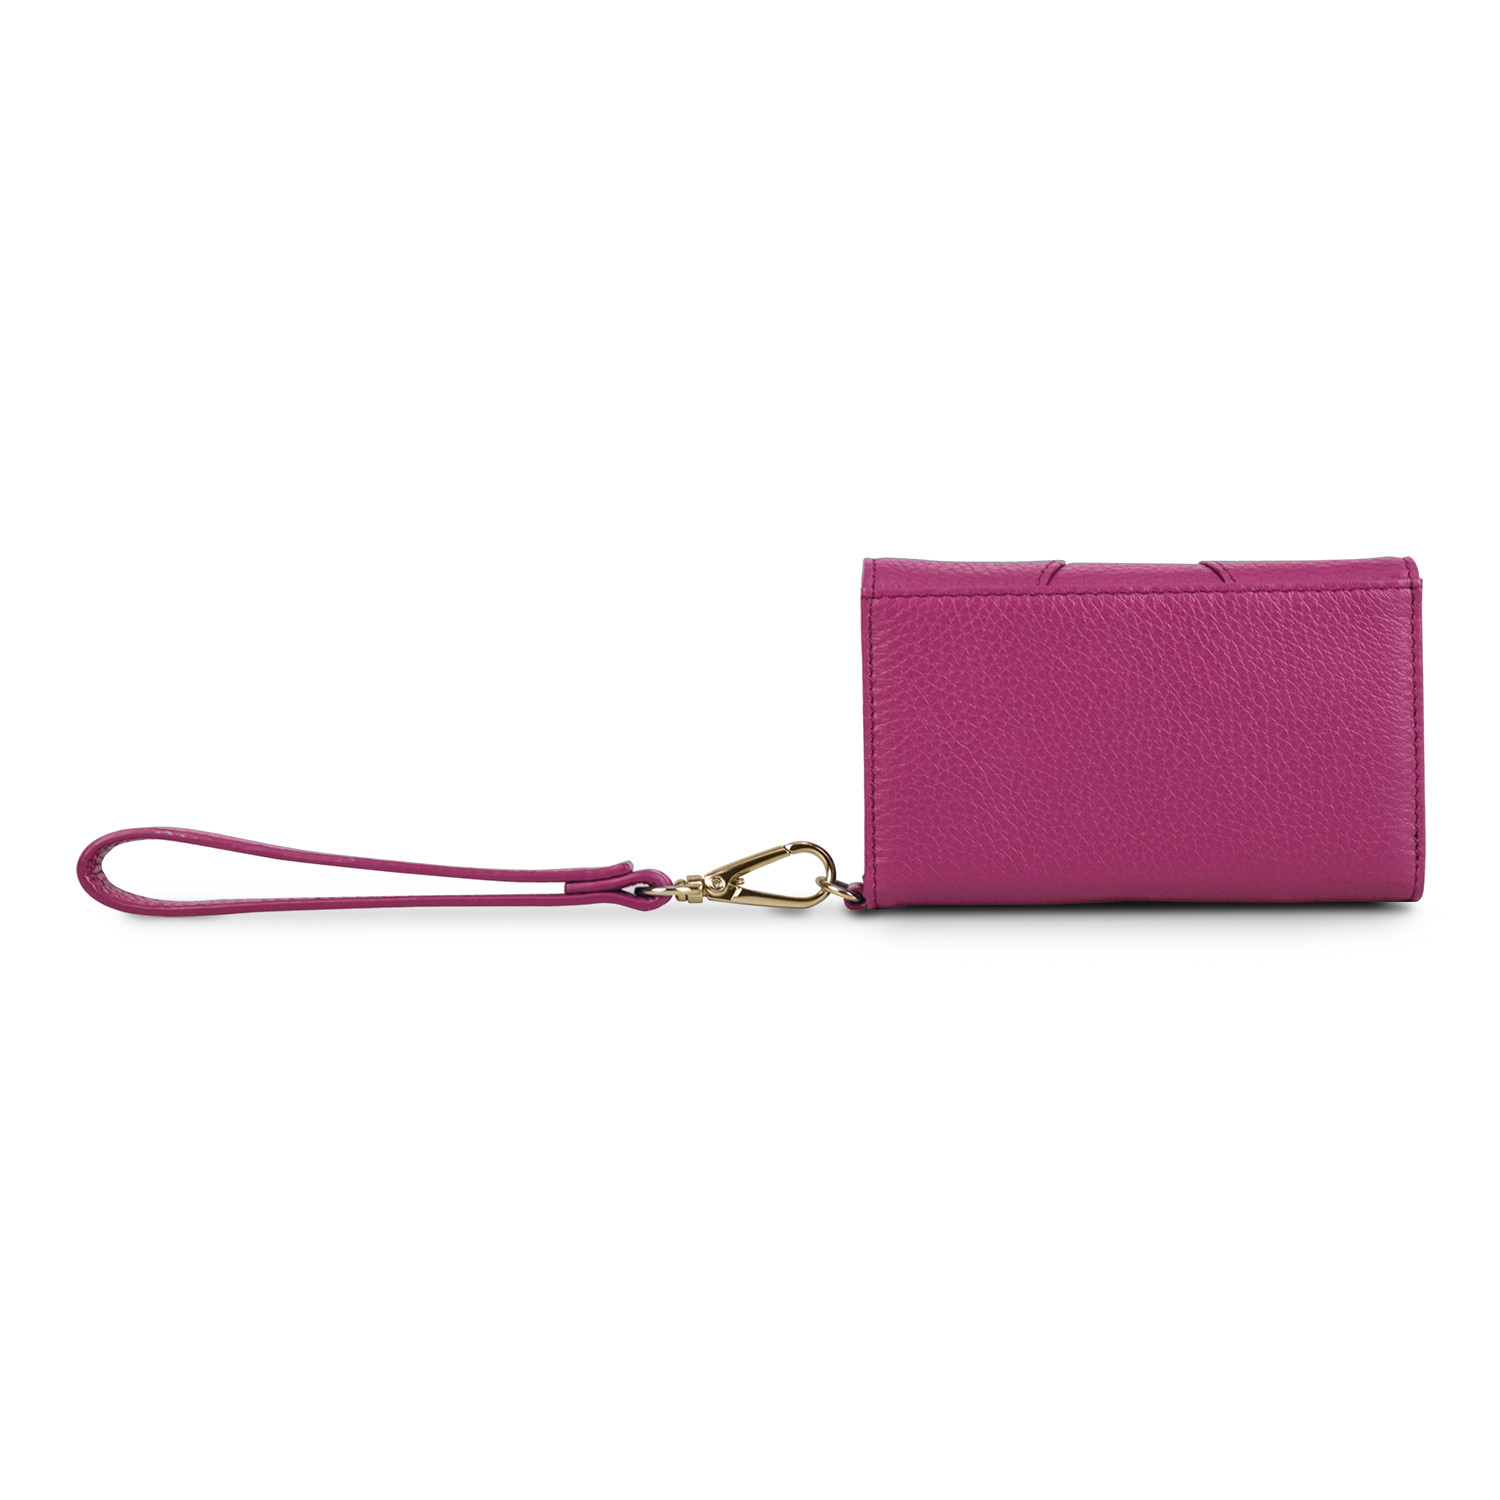 Wristlet Wallet for iPhone 4/4S // Berry - Bodhi tech - Touch of Modern